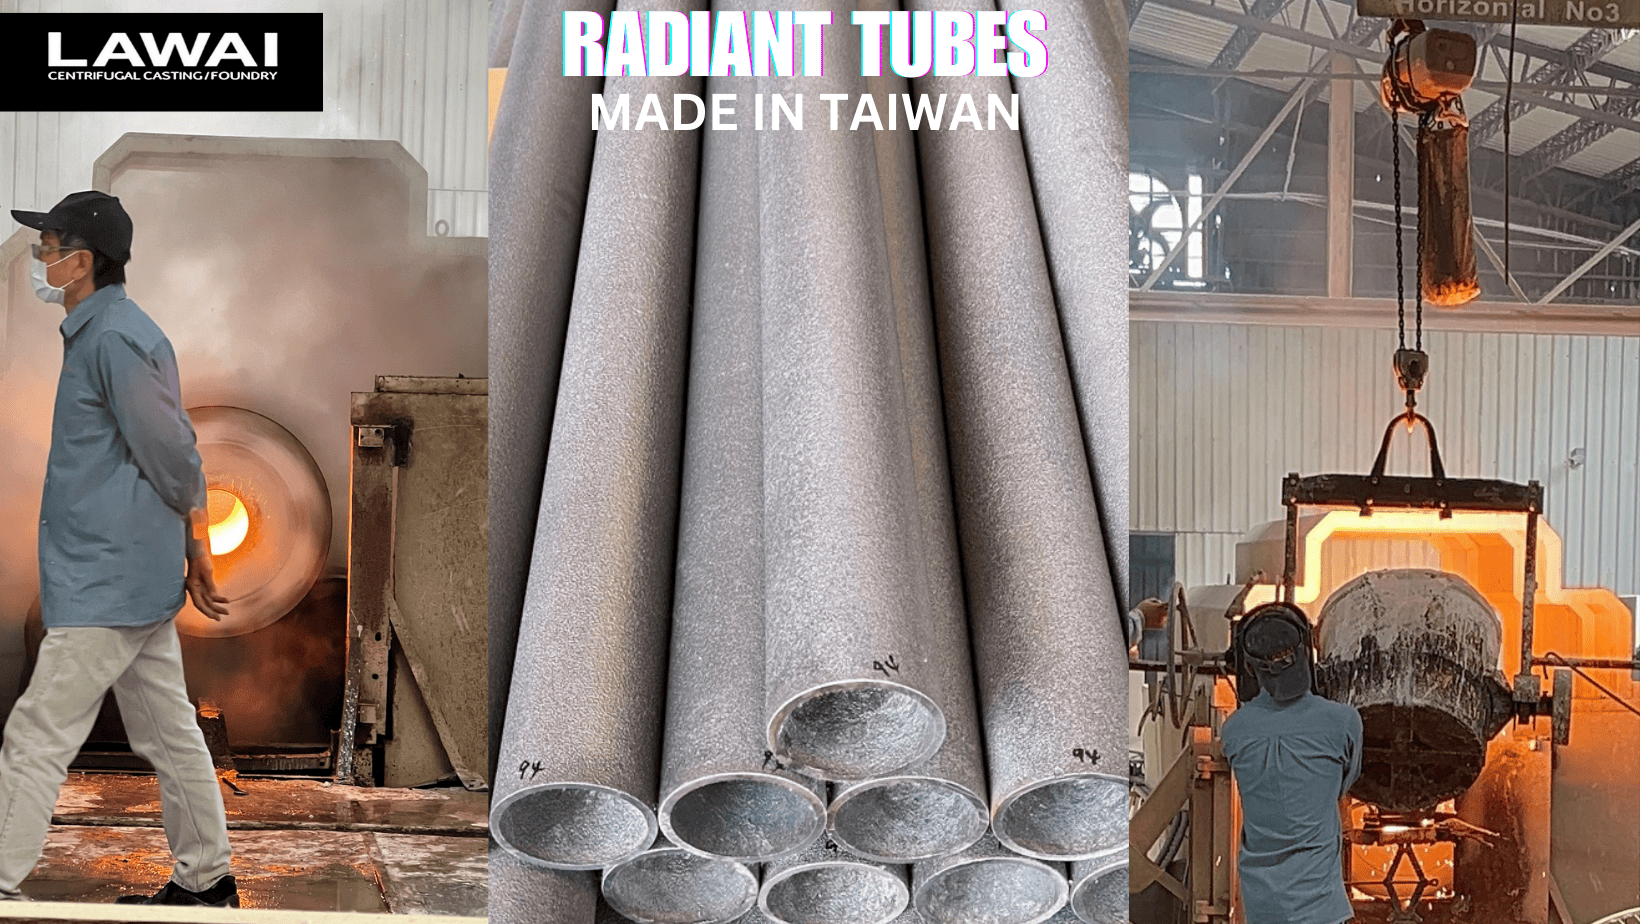 LAWAI INDUSTRIAL CORPORATION is the radiant tube manufacturer specialized in centrifugal casting technique in Taiwan